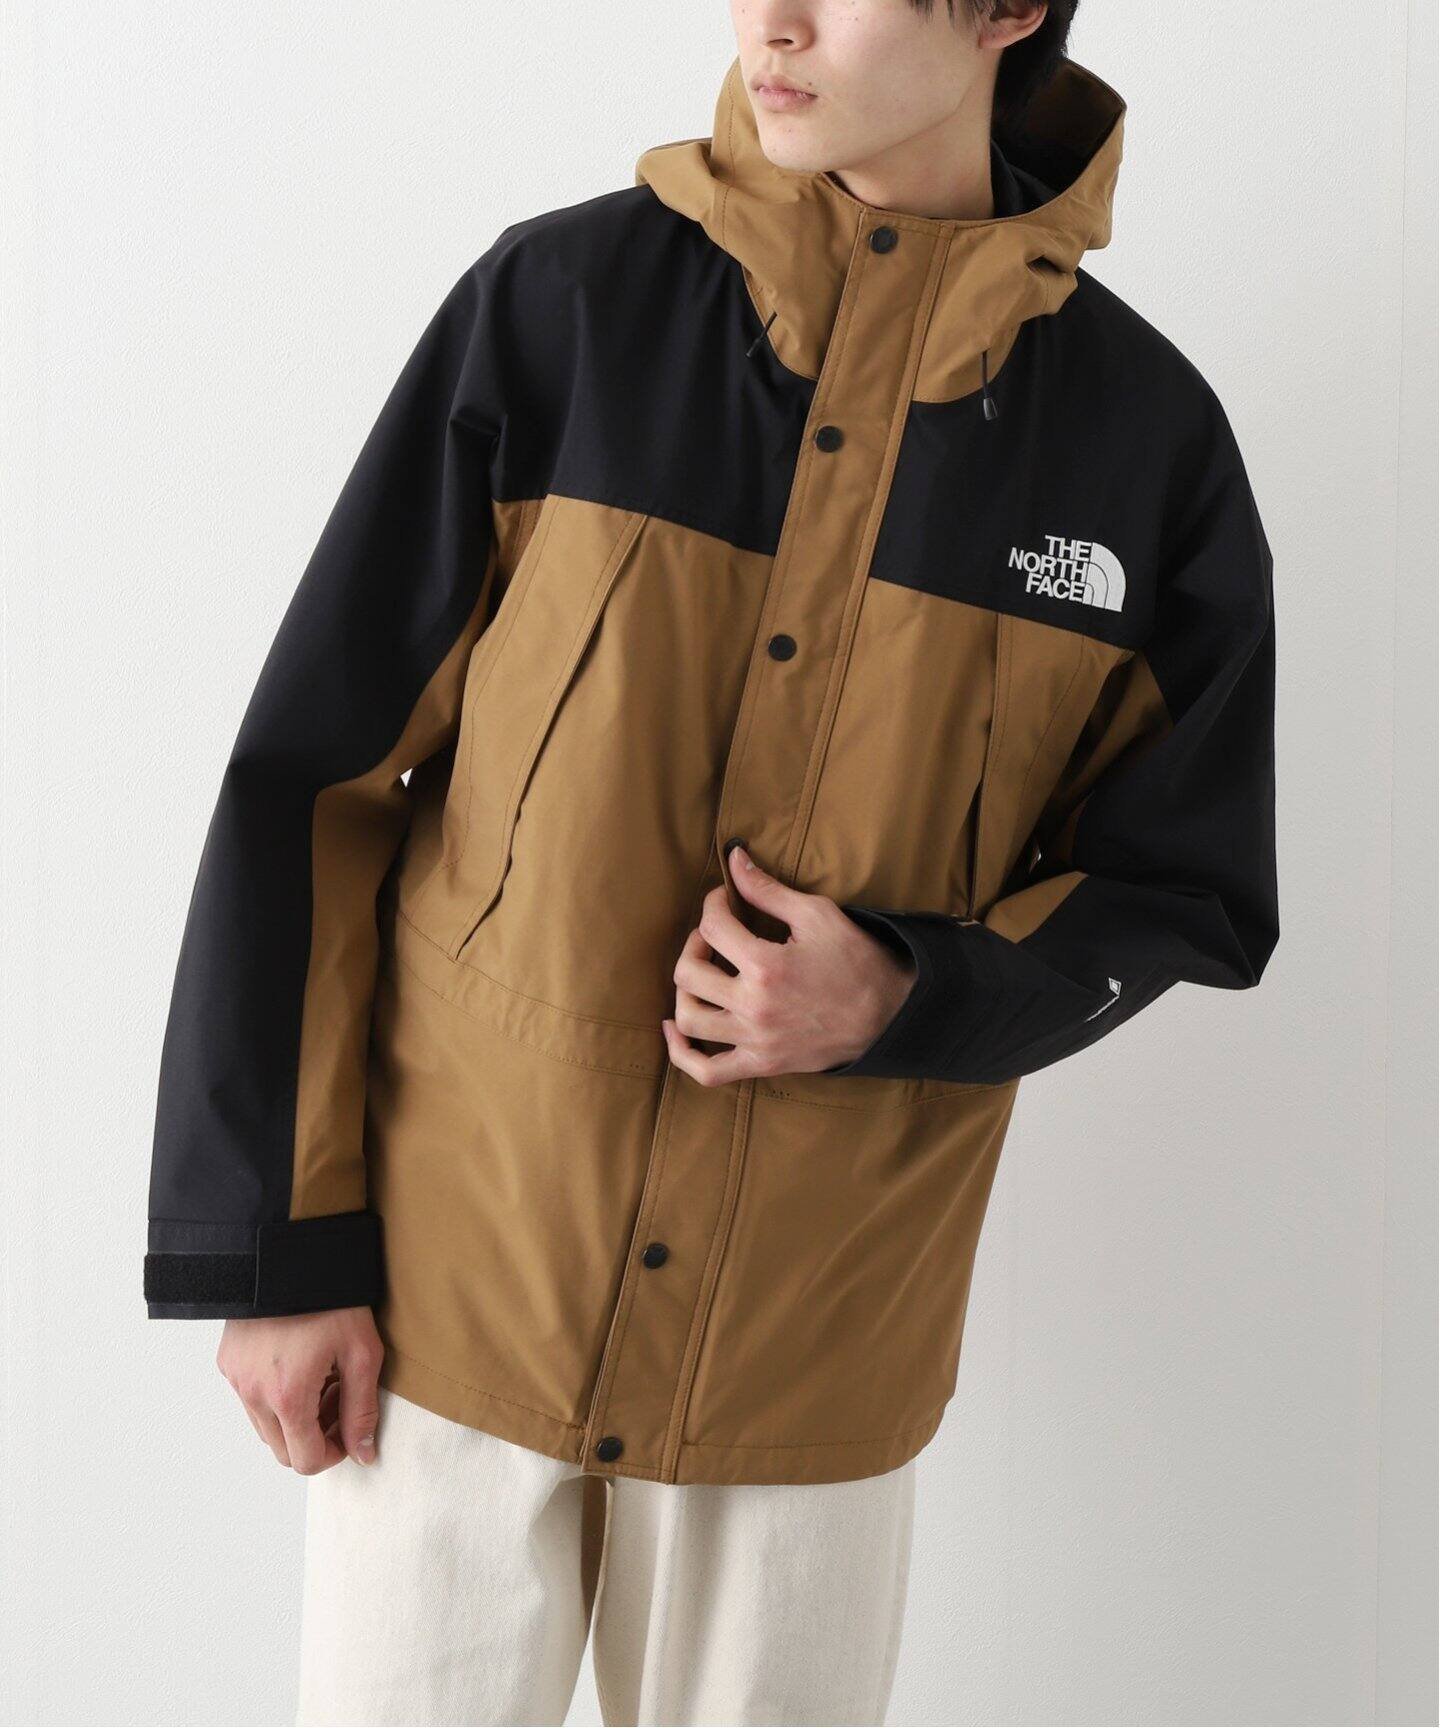 THE NORTH FACE/ザノースフェイス』M'S CITY CHILLER JACKET ナイロン ...